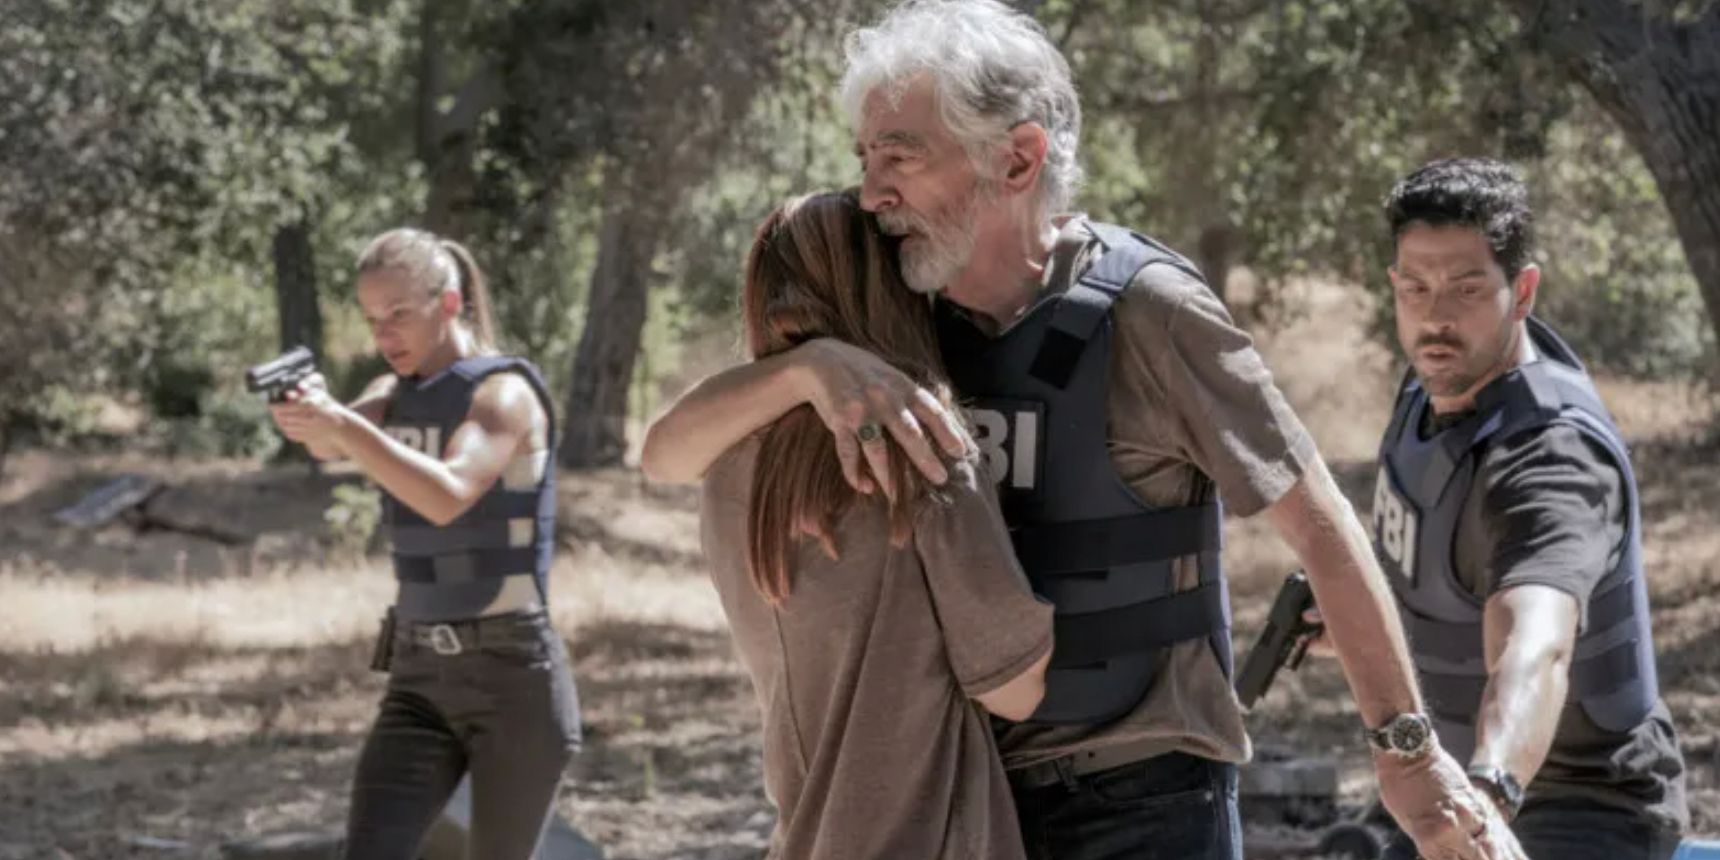 Rossi hugs an abduction survivor with team members behind him in the Criminal Minds Evolution premiere